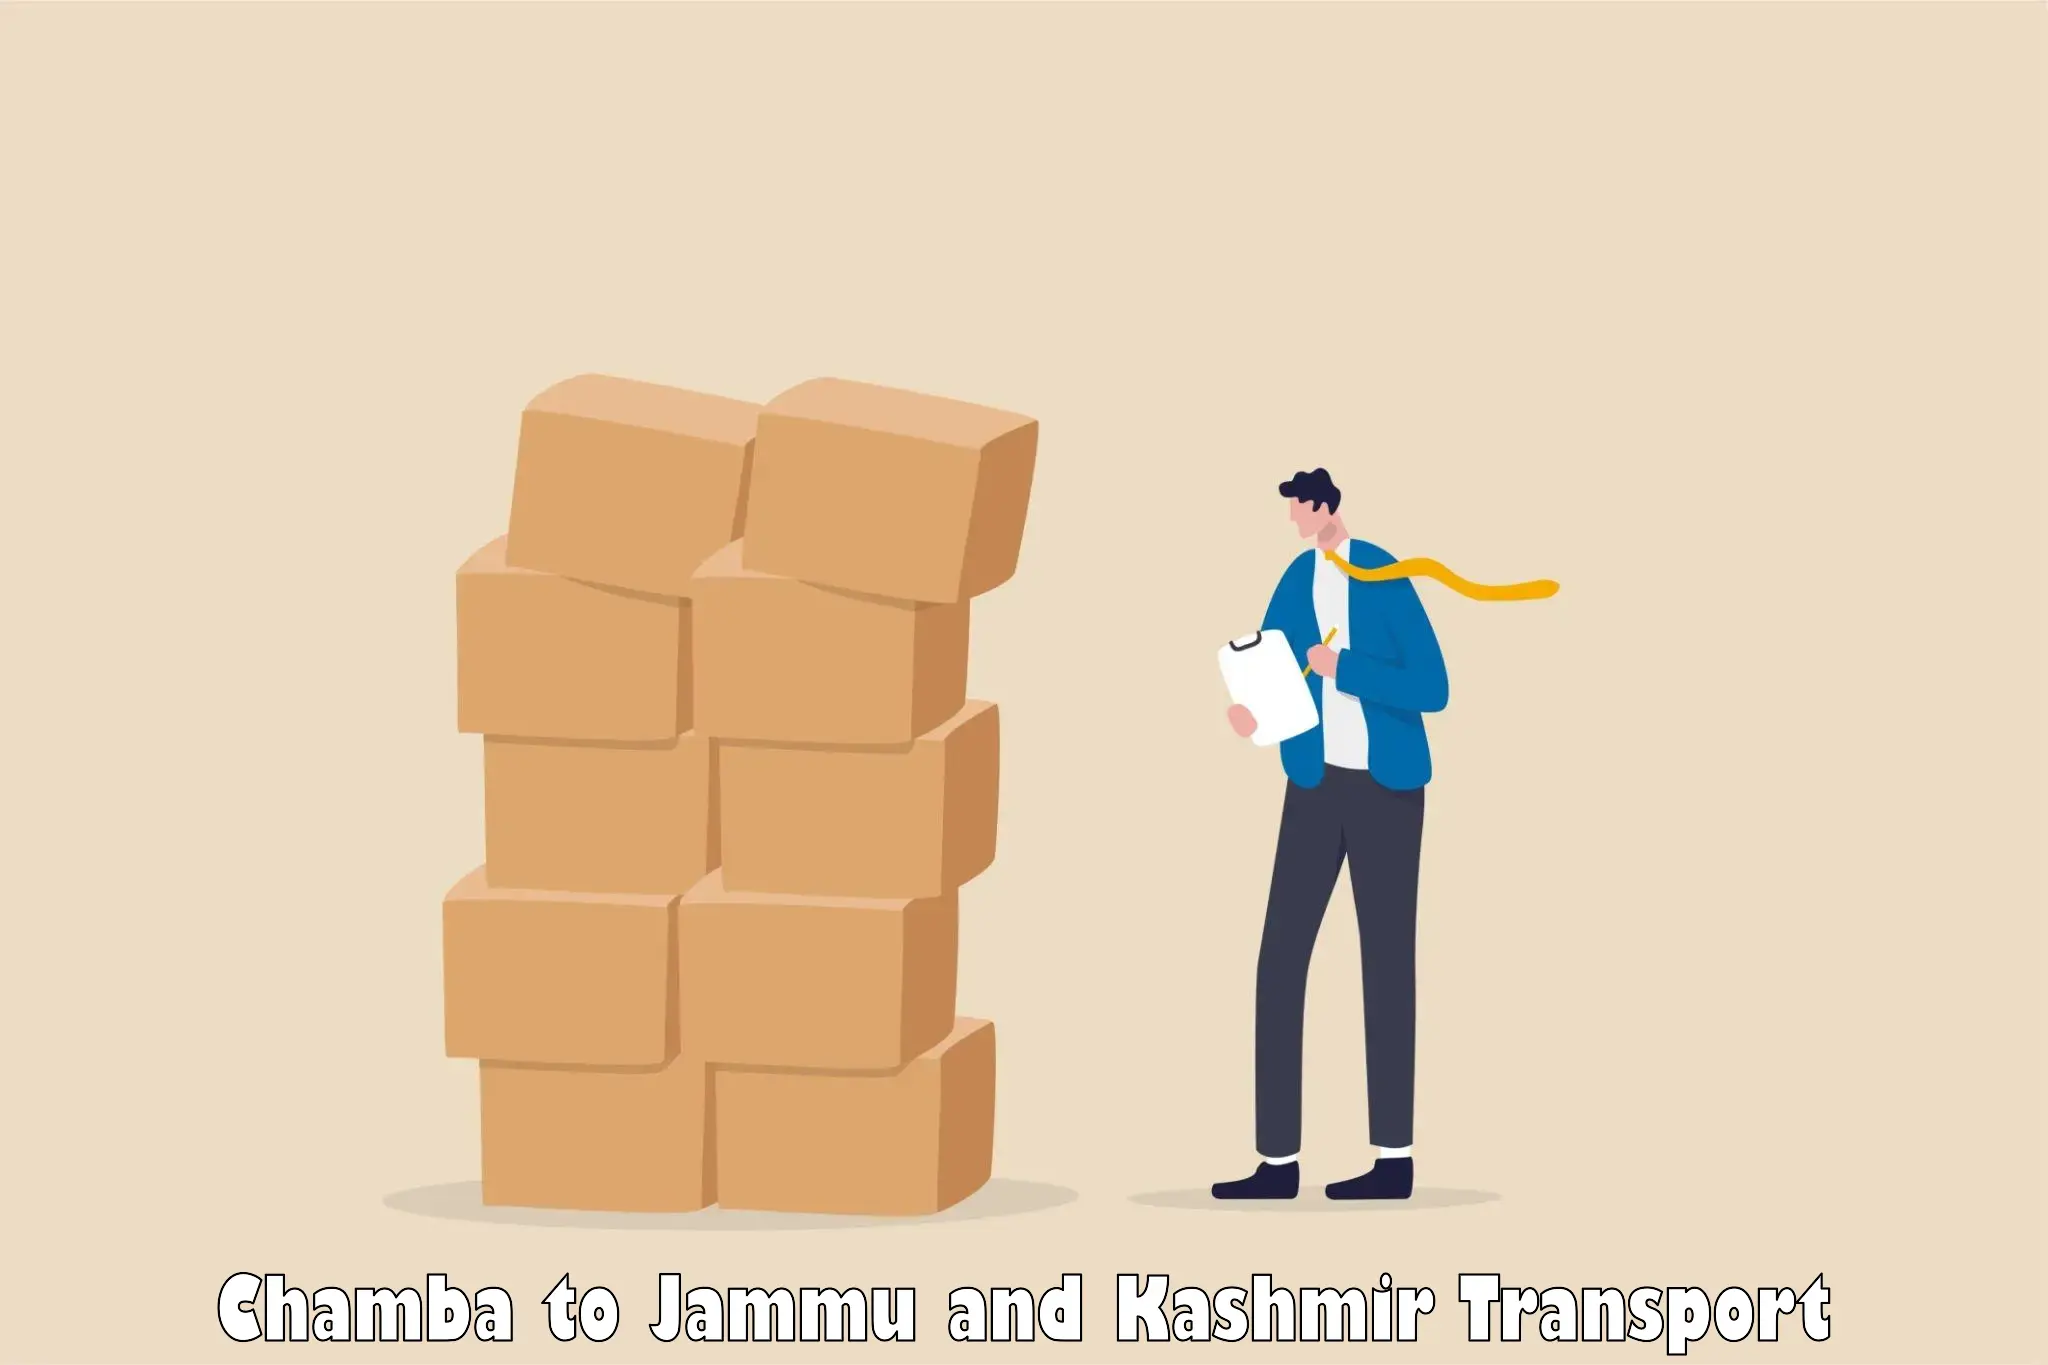 Transport bike from one state to another Chamba to Jammu and Kashmir